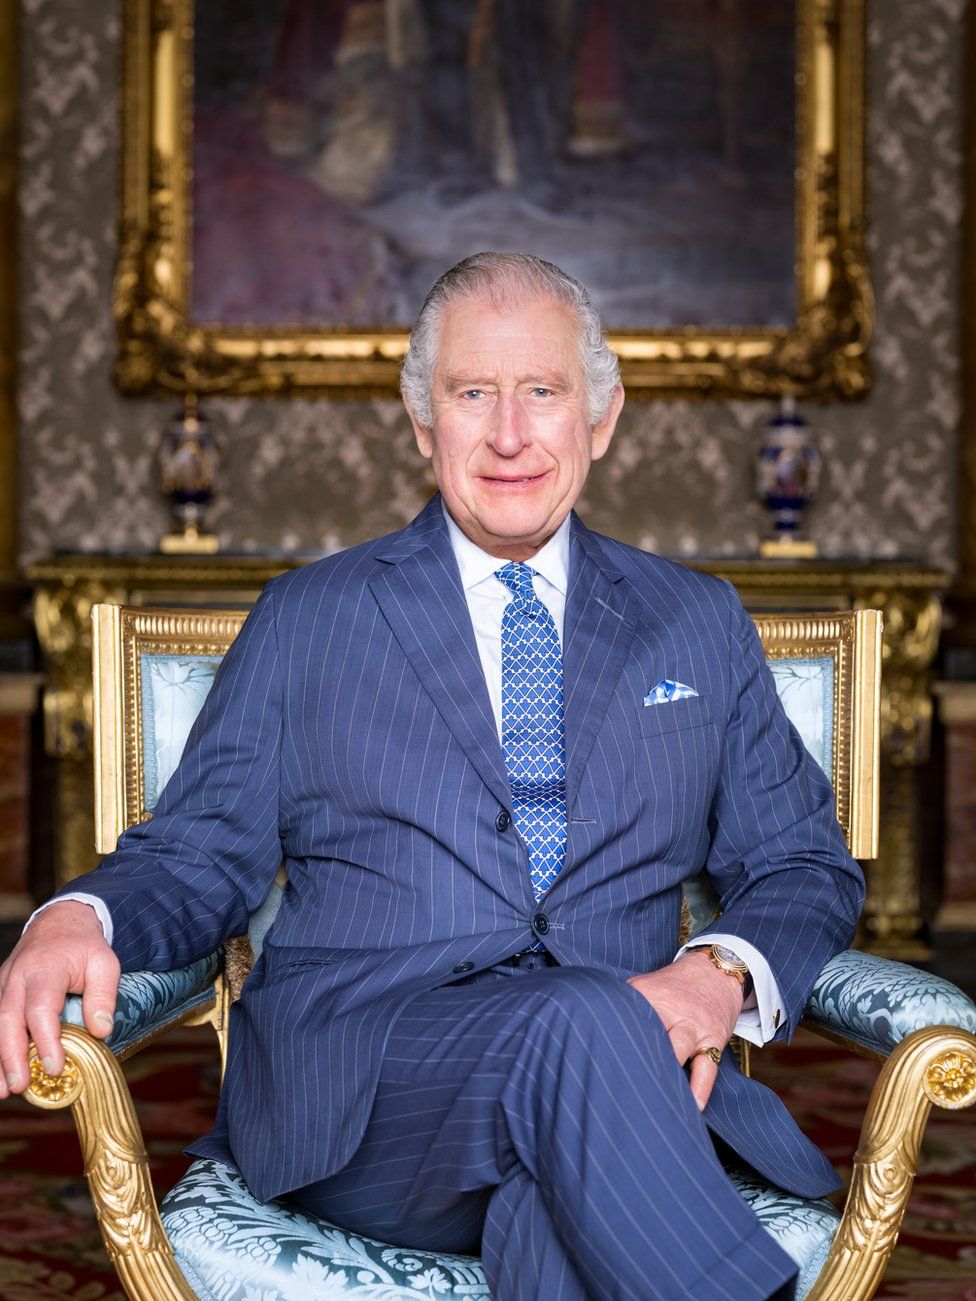 The new photos of the King were taken in the Blue Drawing Room at Buckingham Palace